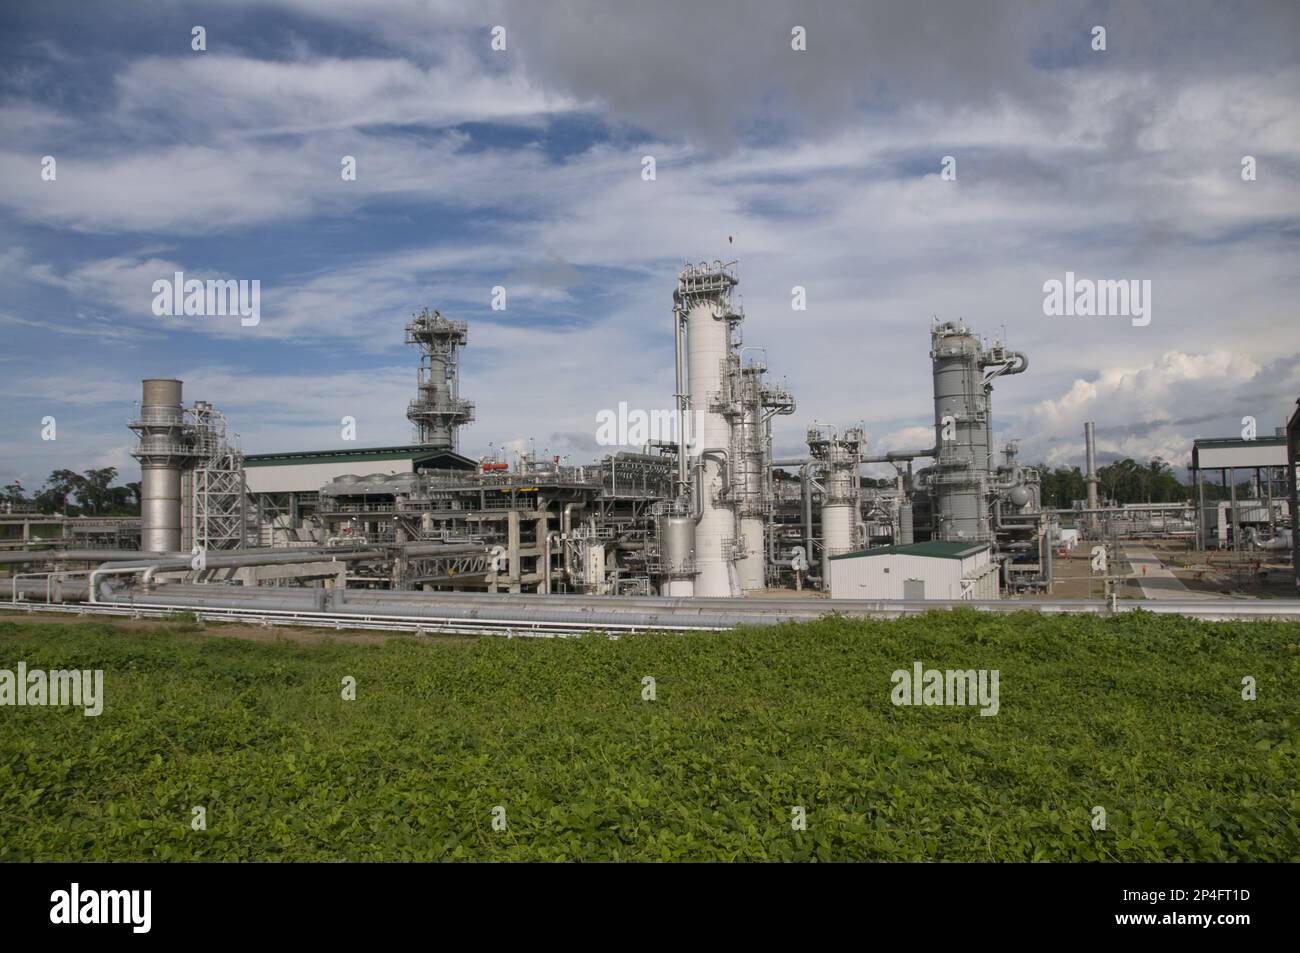 General view of plant, pipelines and tanks, Tangguh LNG (Liquified Natural Gas) plant, Bintuni Bay, West Papua (Irian Jaya), Indonesia Stock Photo